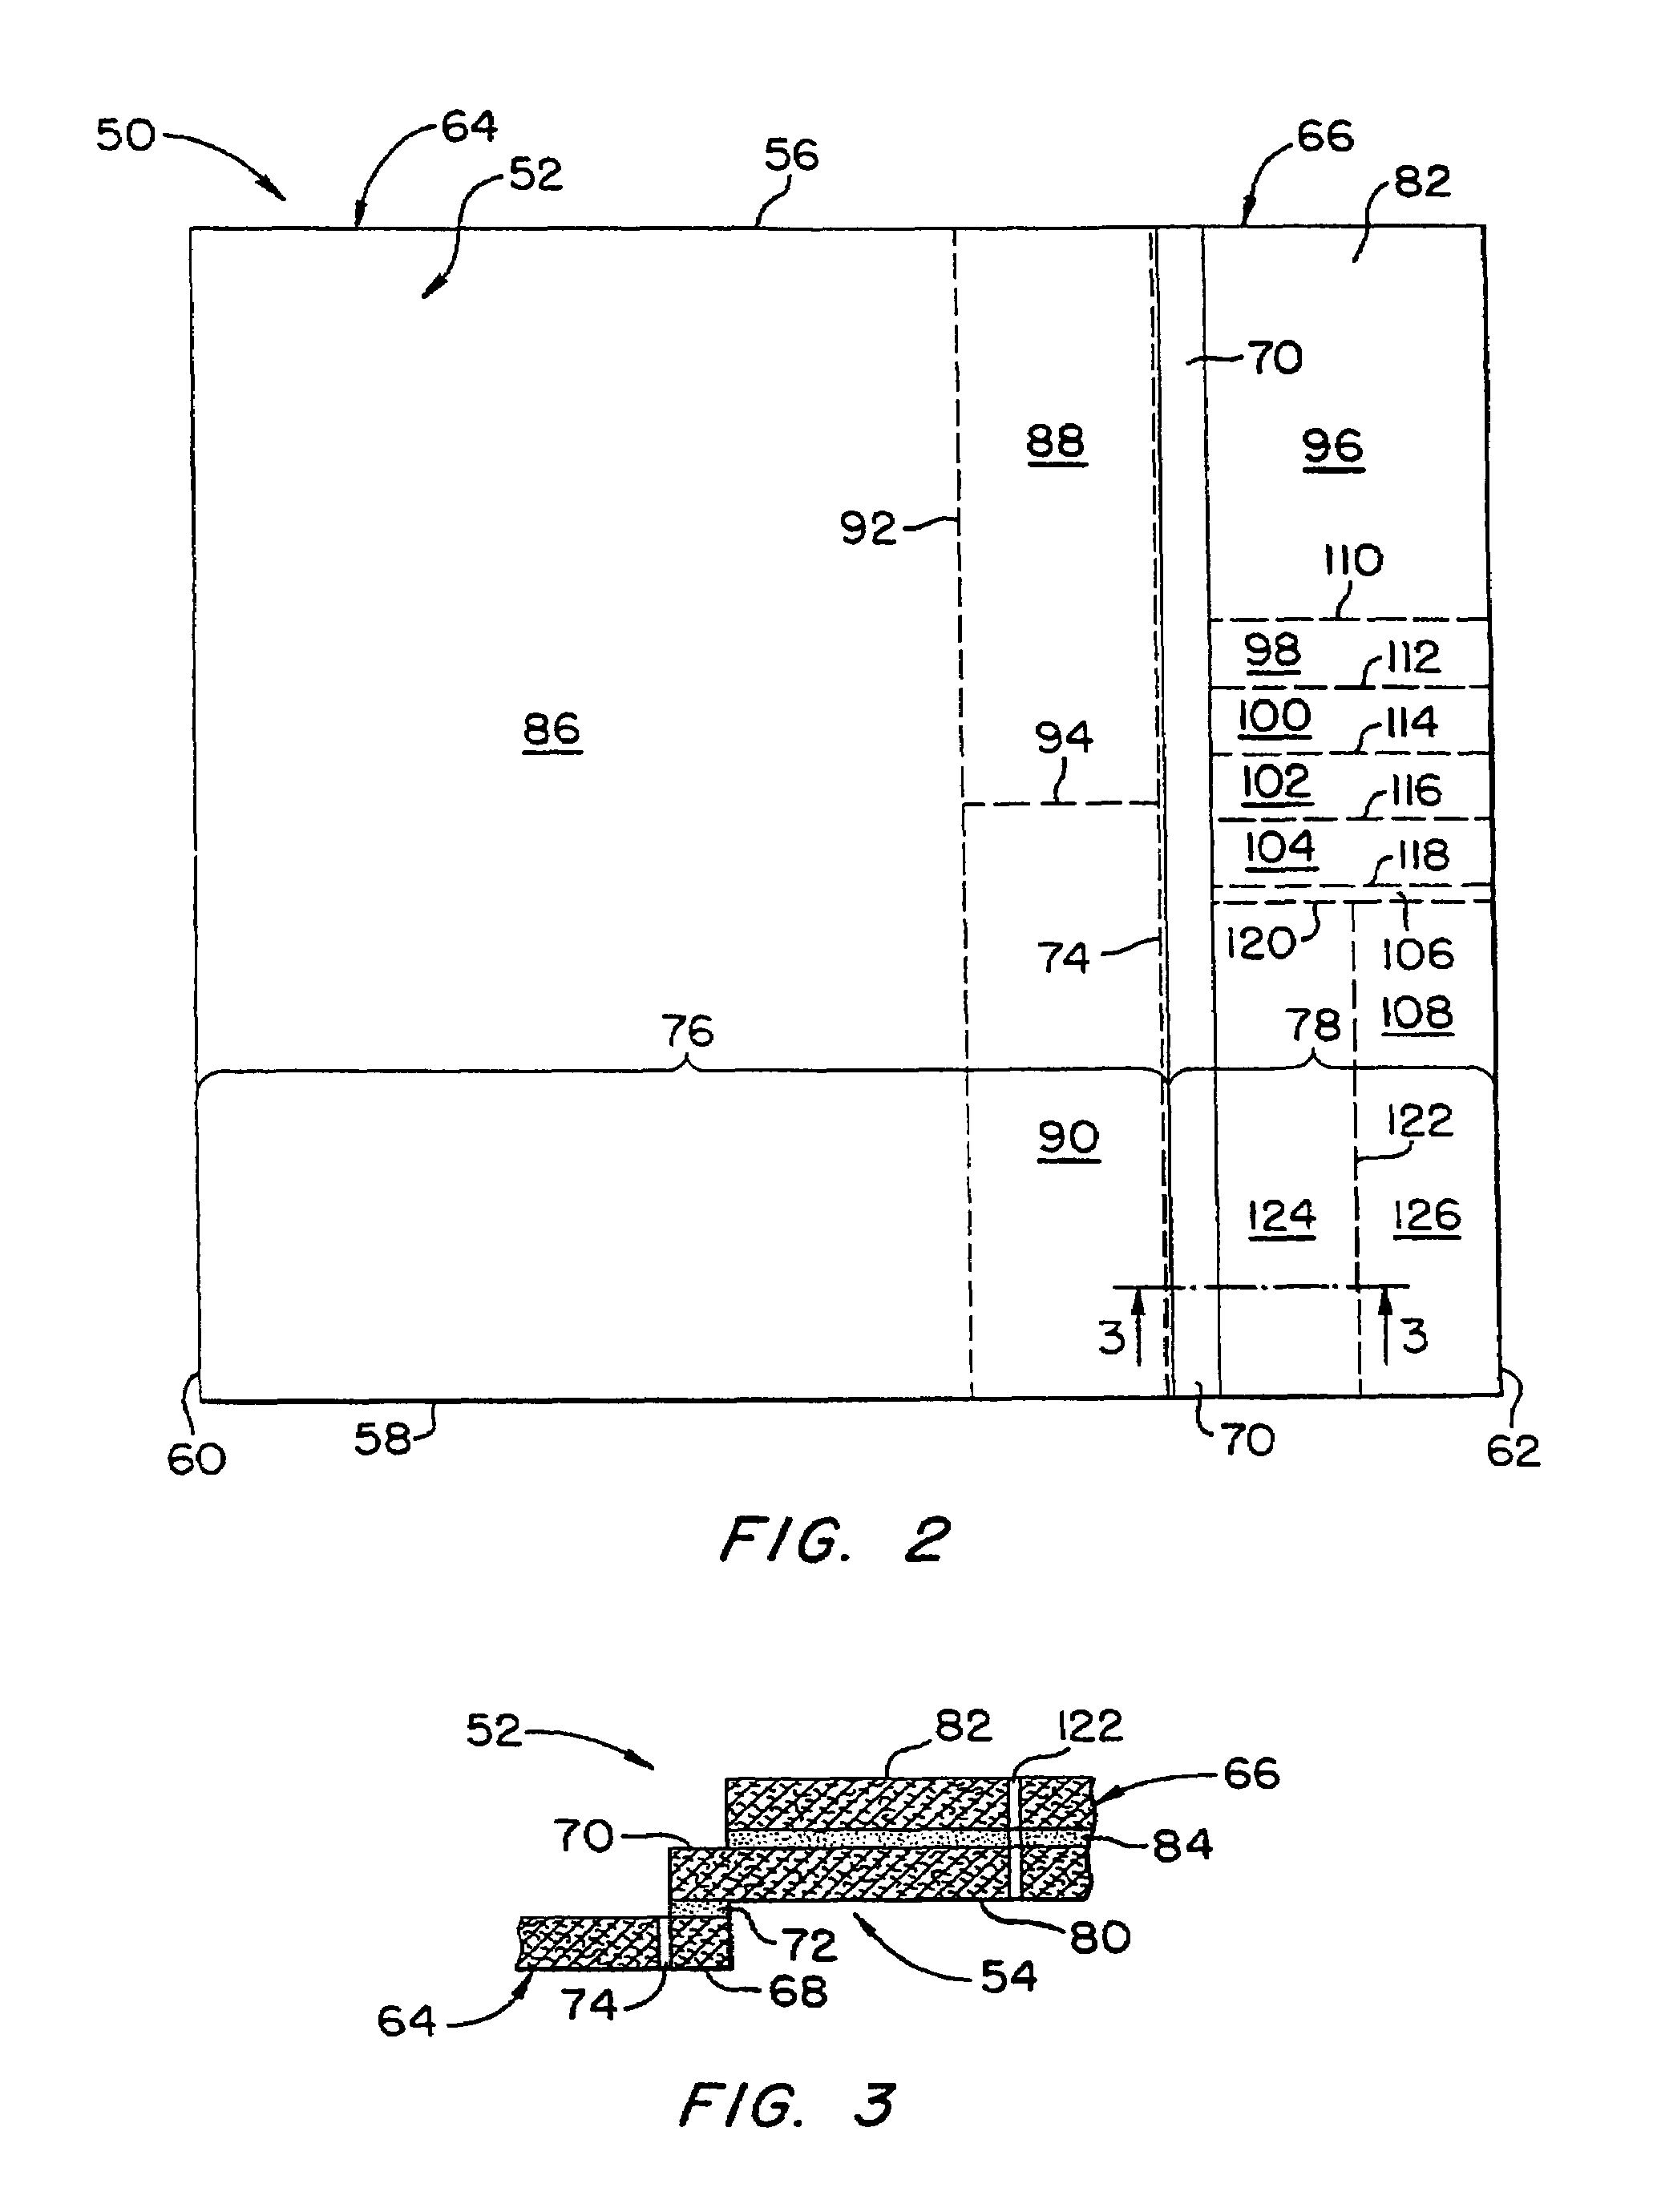 Method for simultaneously preparing pharmacy vial label and drug-specific warning labels